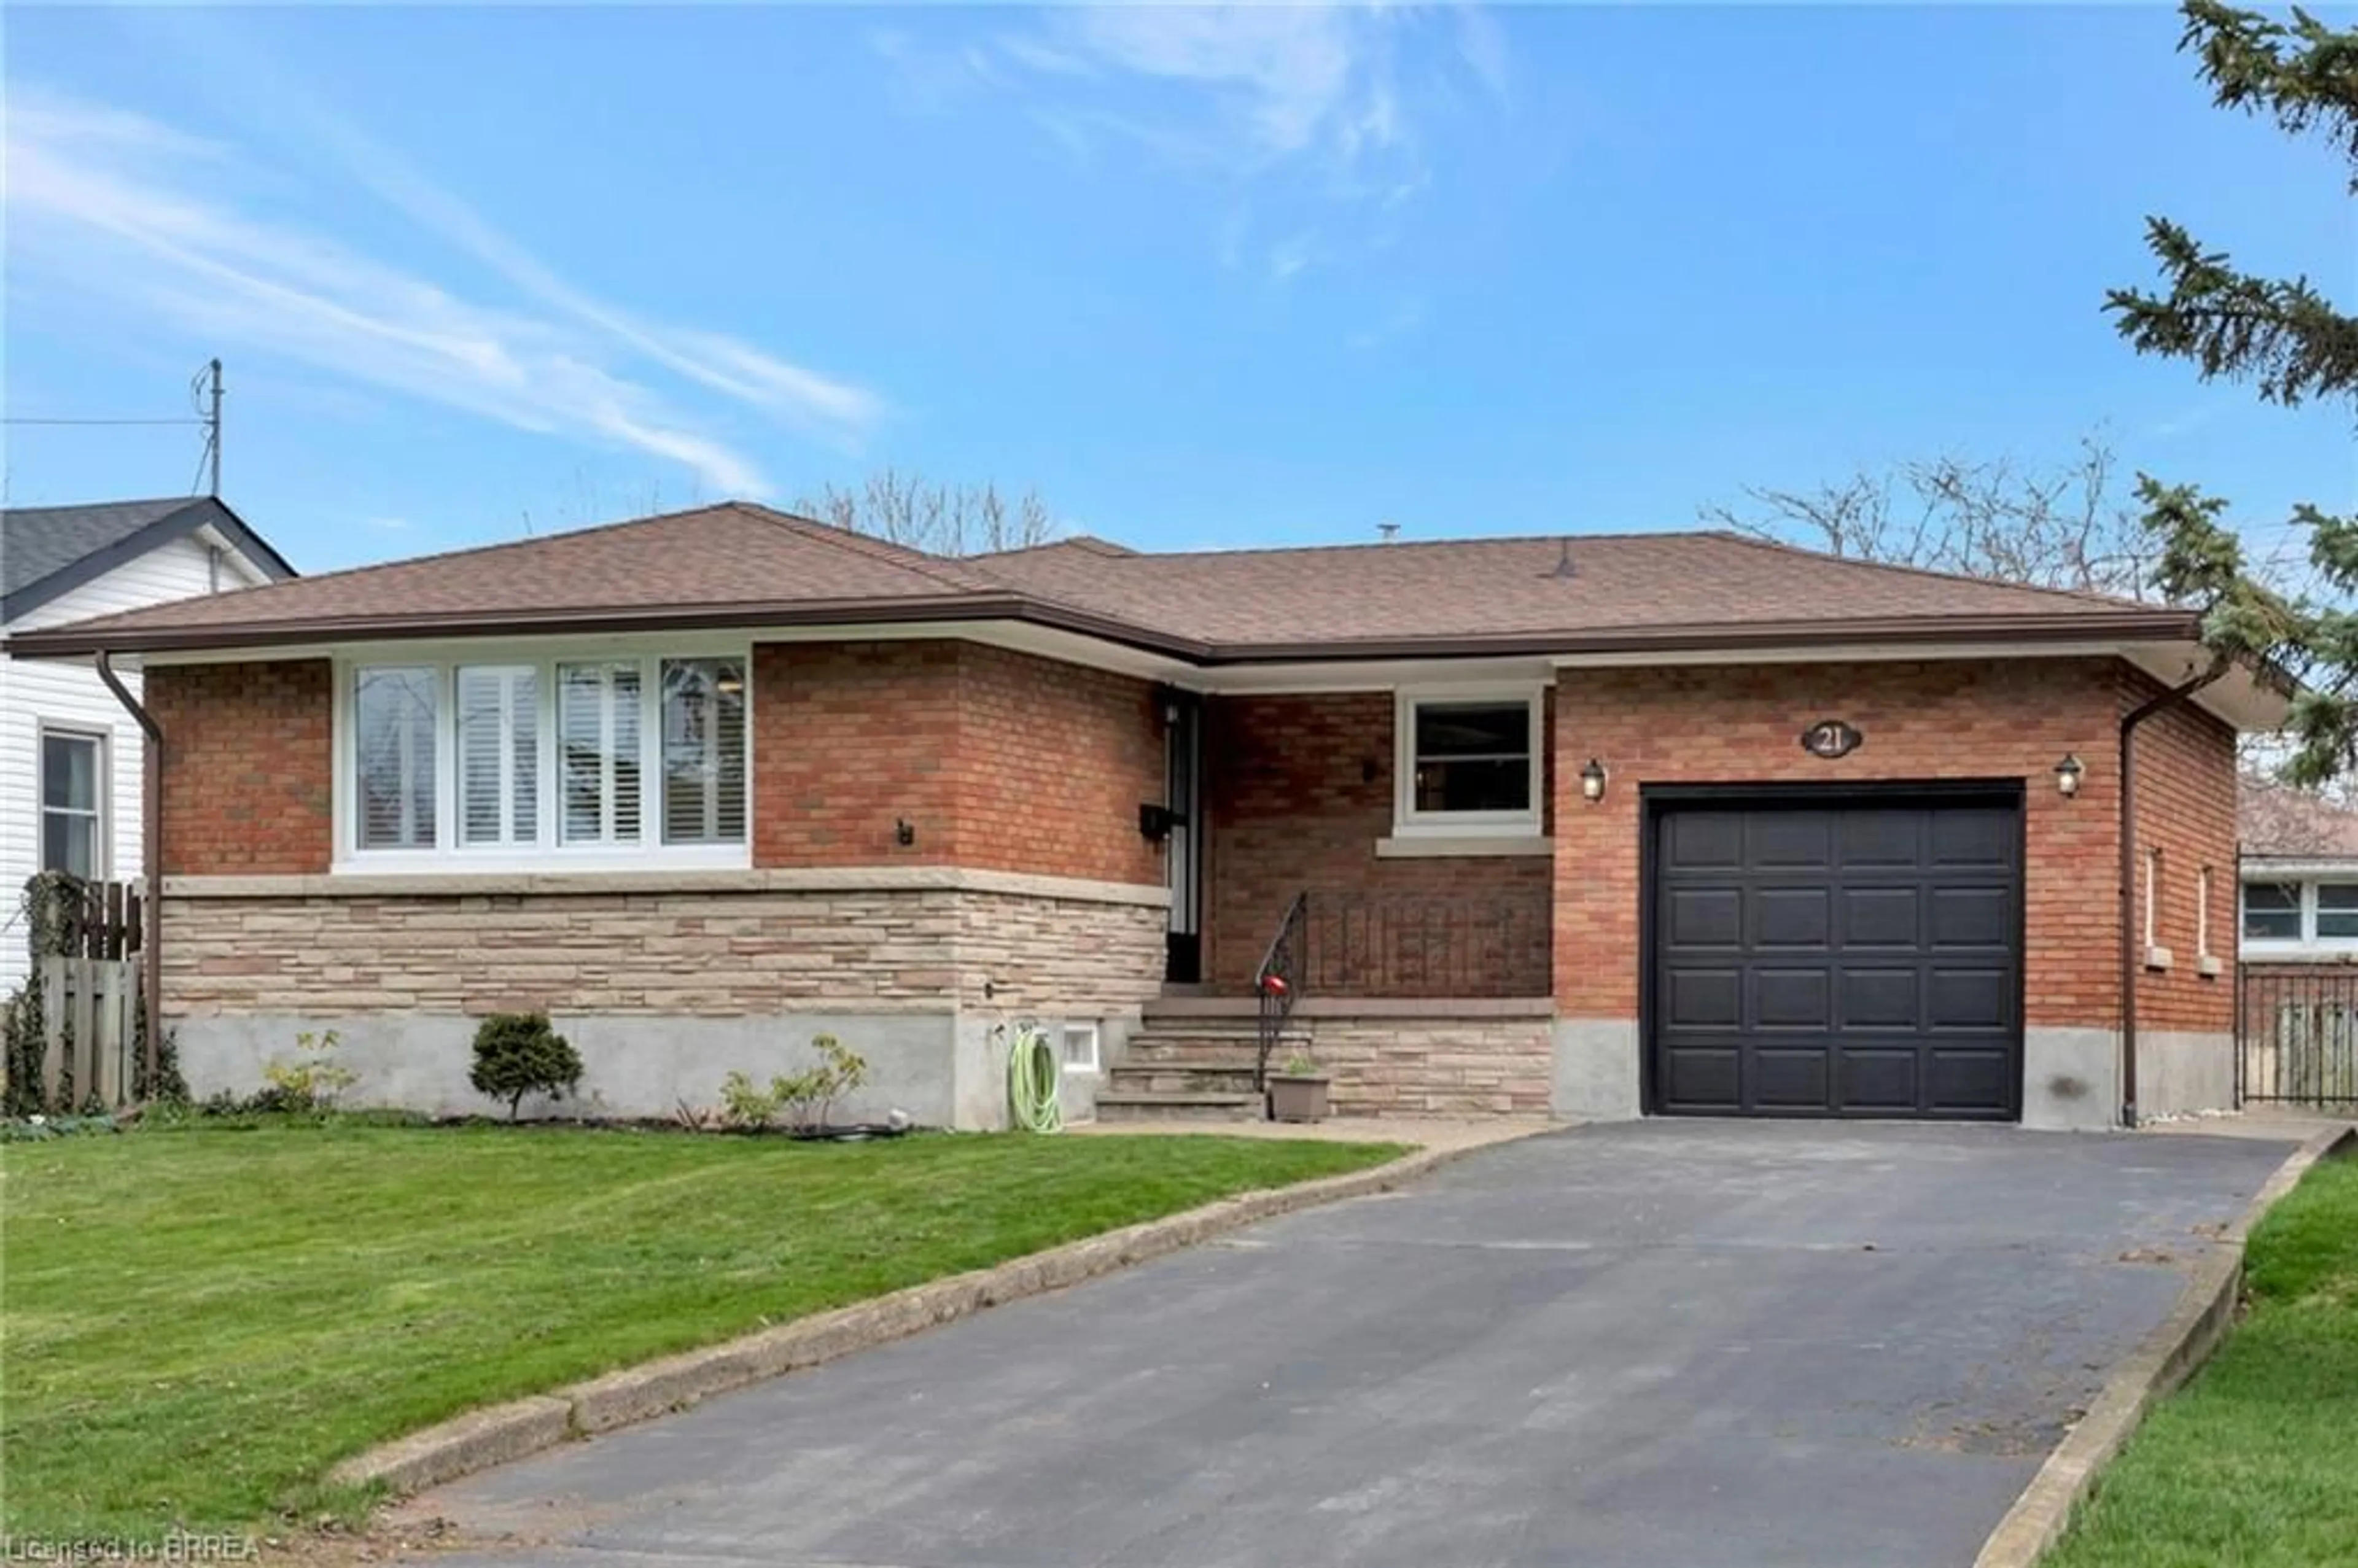 Home with brick exterior material for 21 Jefferson Ave, Port Colborne Ontario L3K 5M7